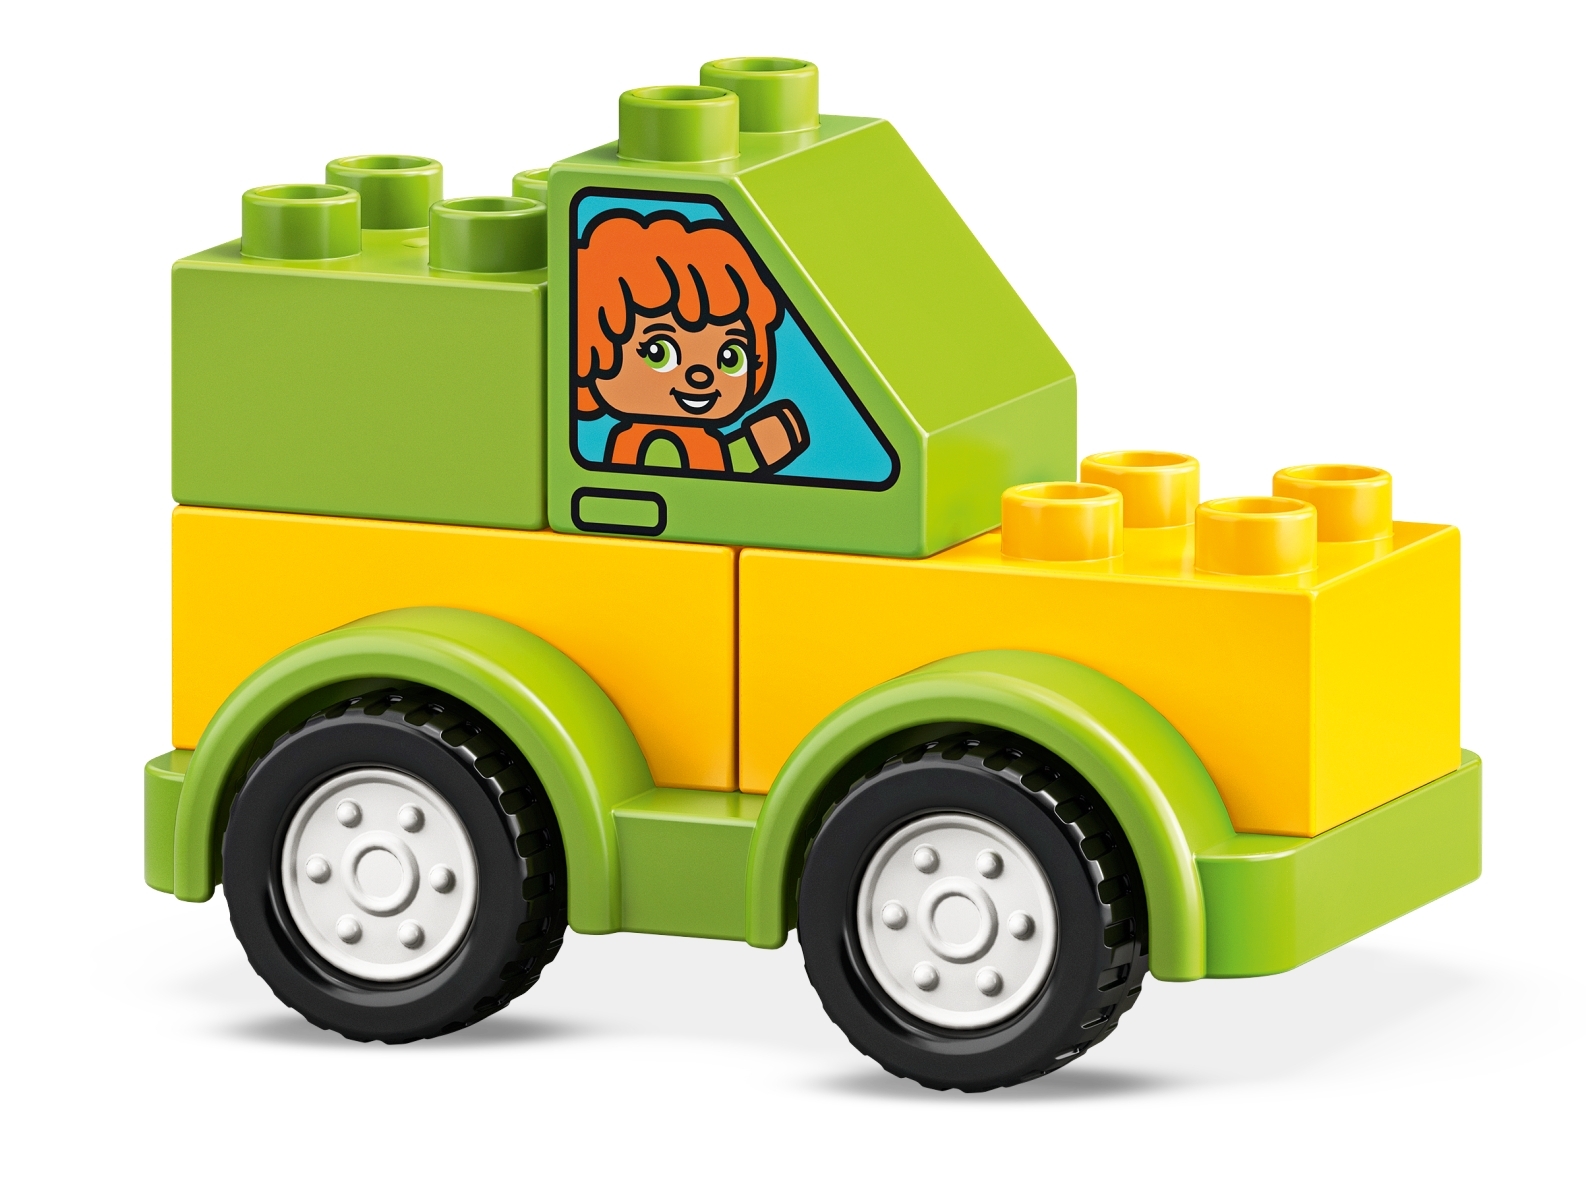 2019 LEGO DUPLO My First Car Creations 10886 Building Blocks 34 Pieces